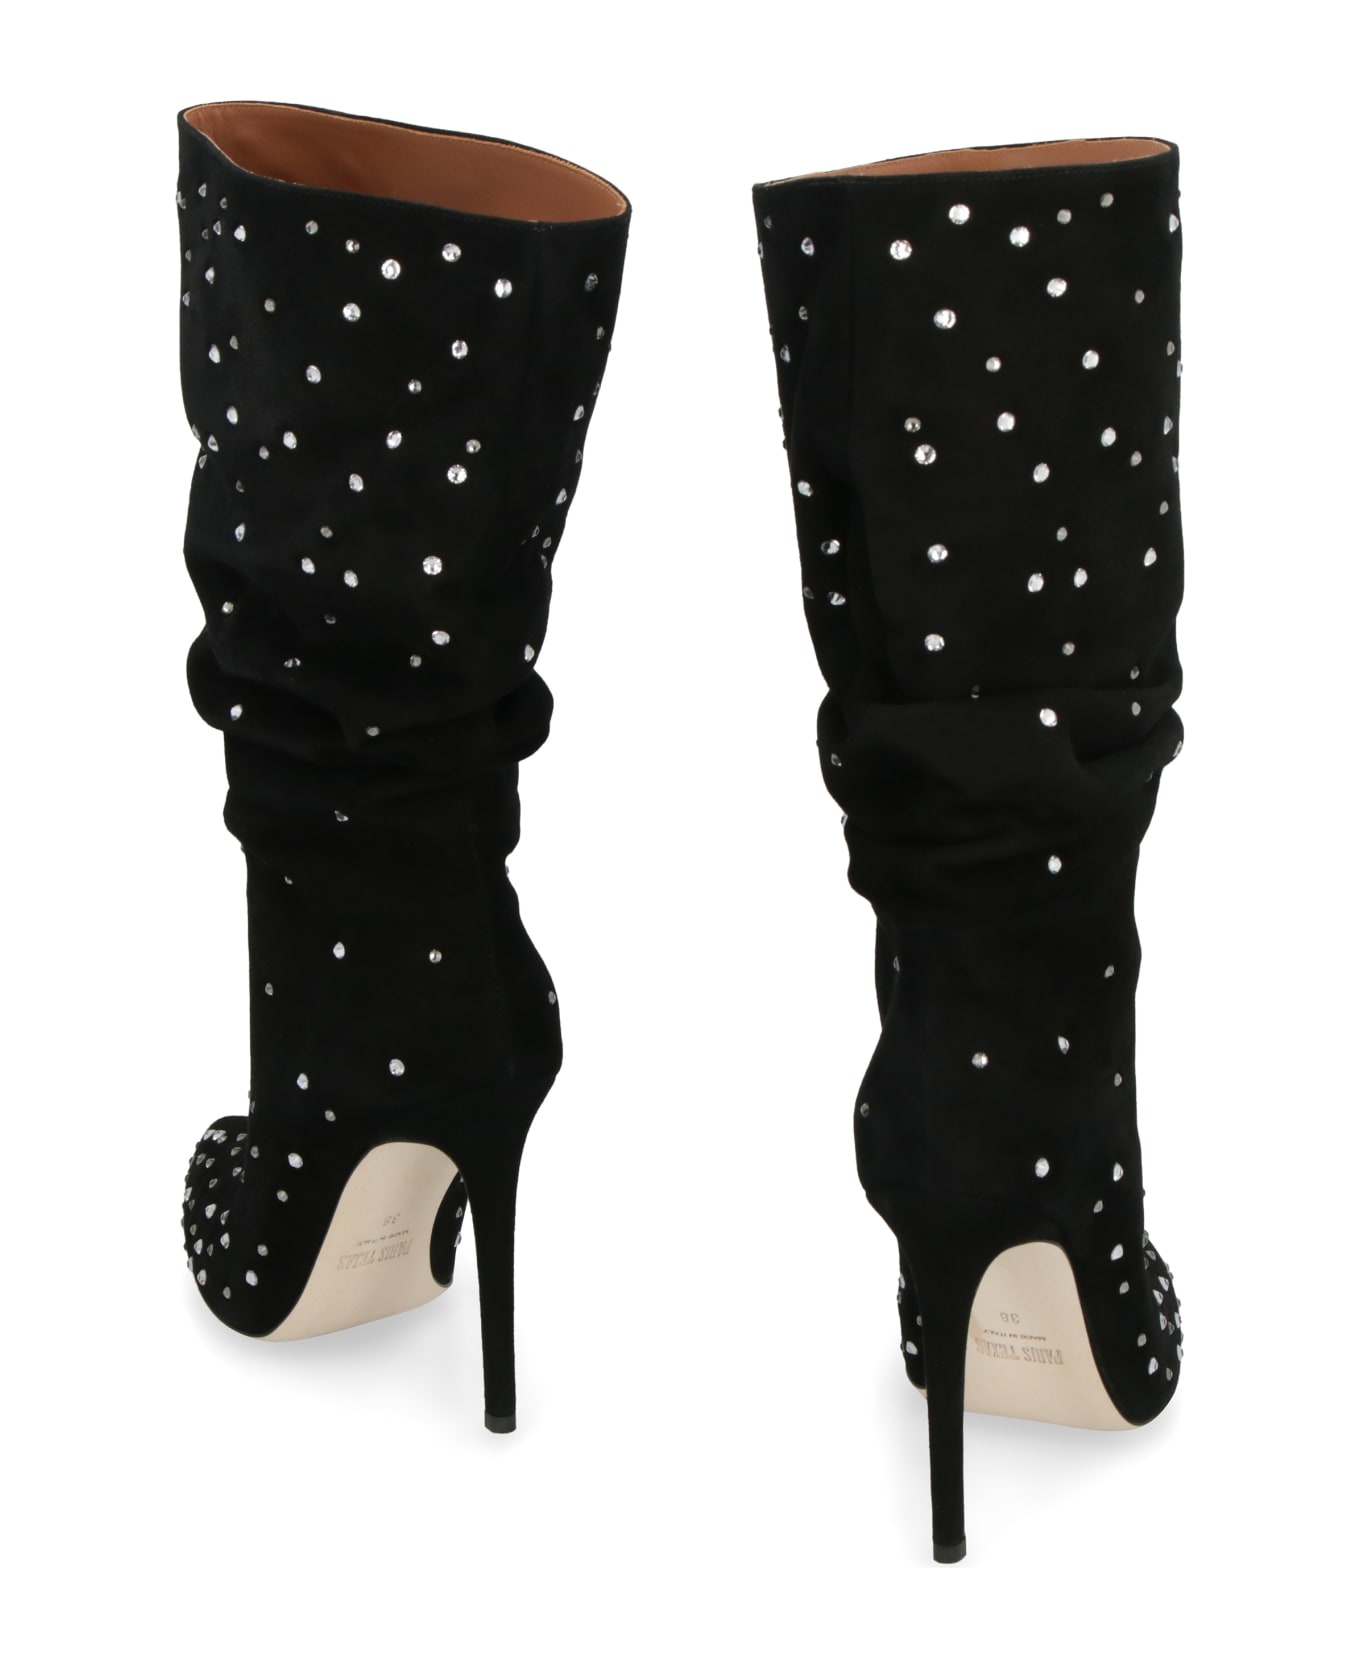 Paris Texas Holly Suede Knee High Boots - black ブーツ